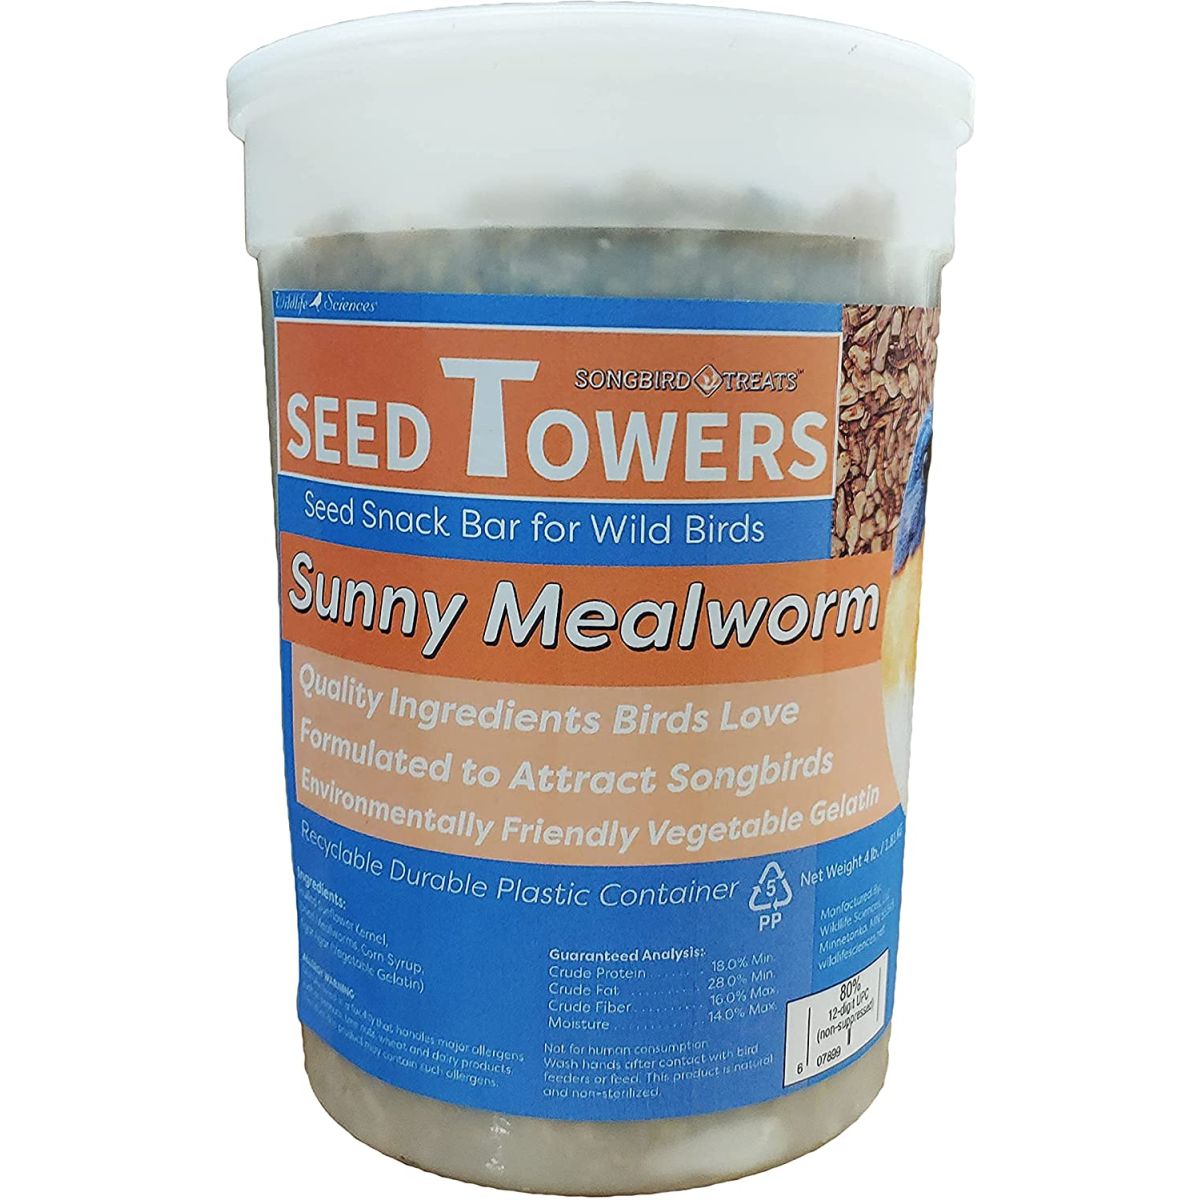 Seed Tower Sunny Mealworm 28oz. 2/Pack